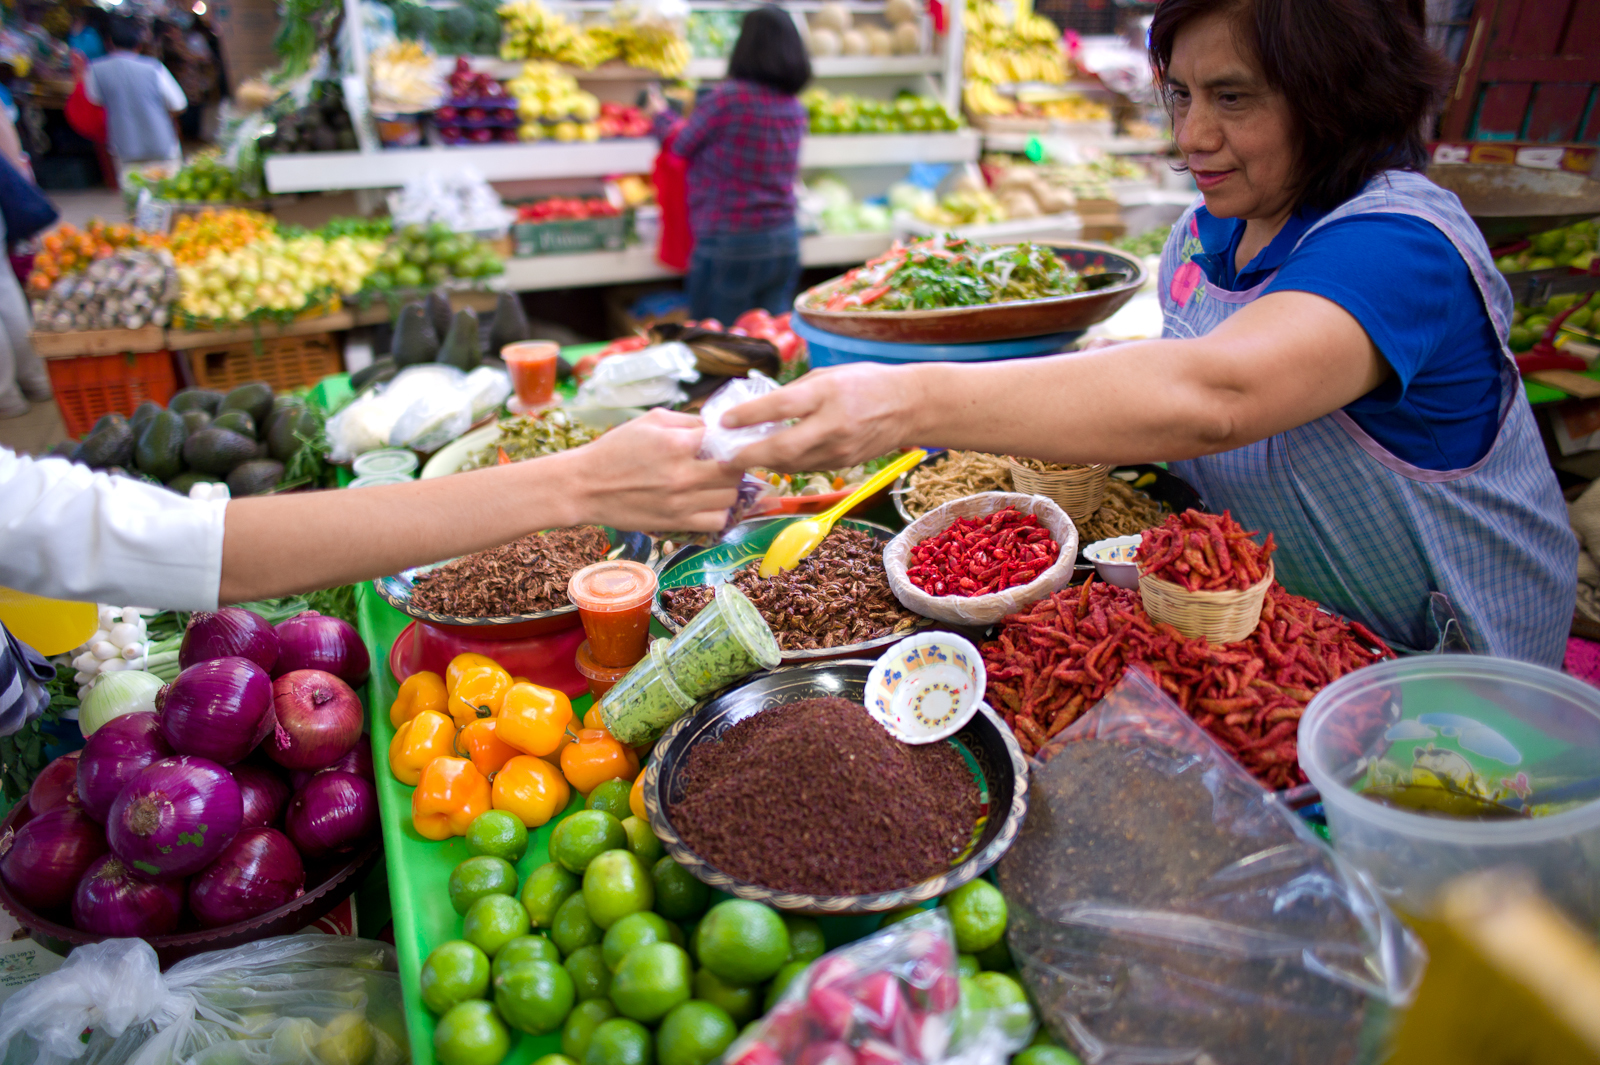 Buying chapulines (grasshoppers)